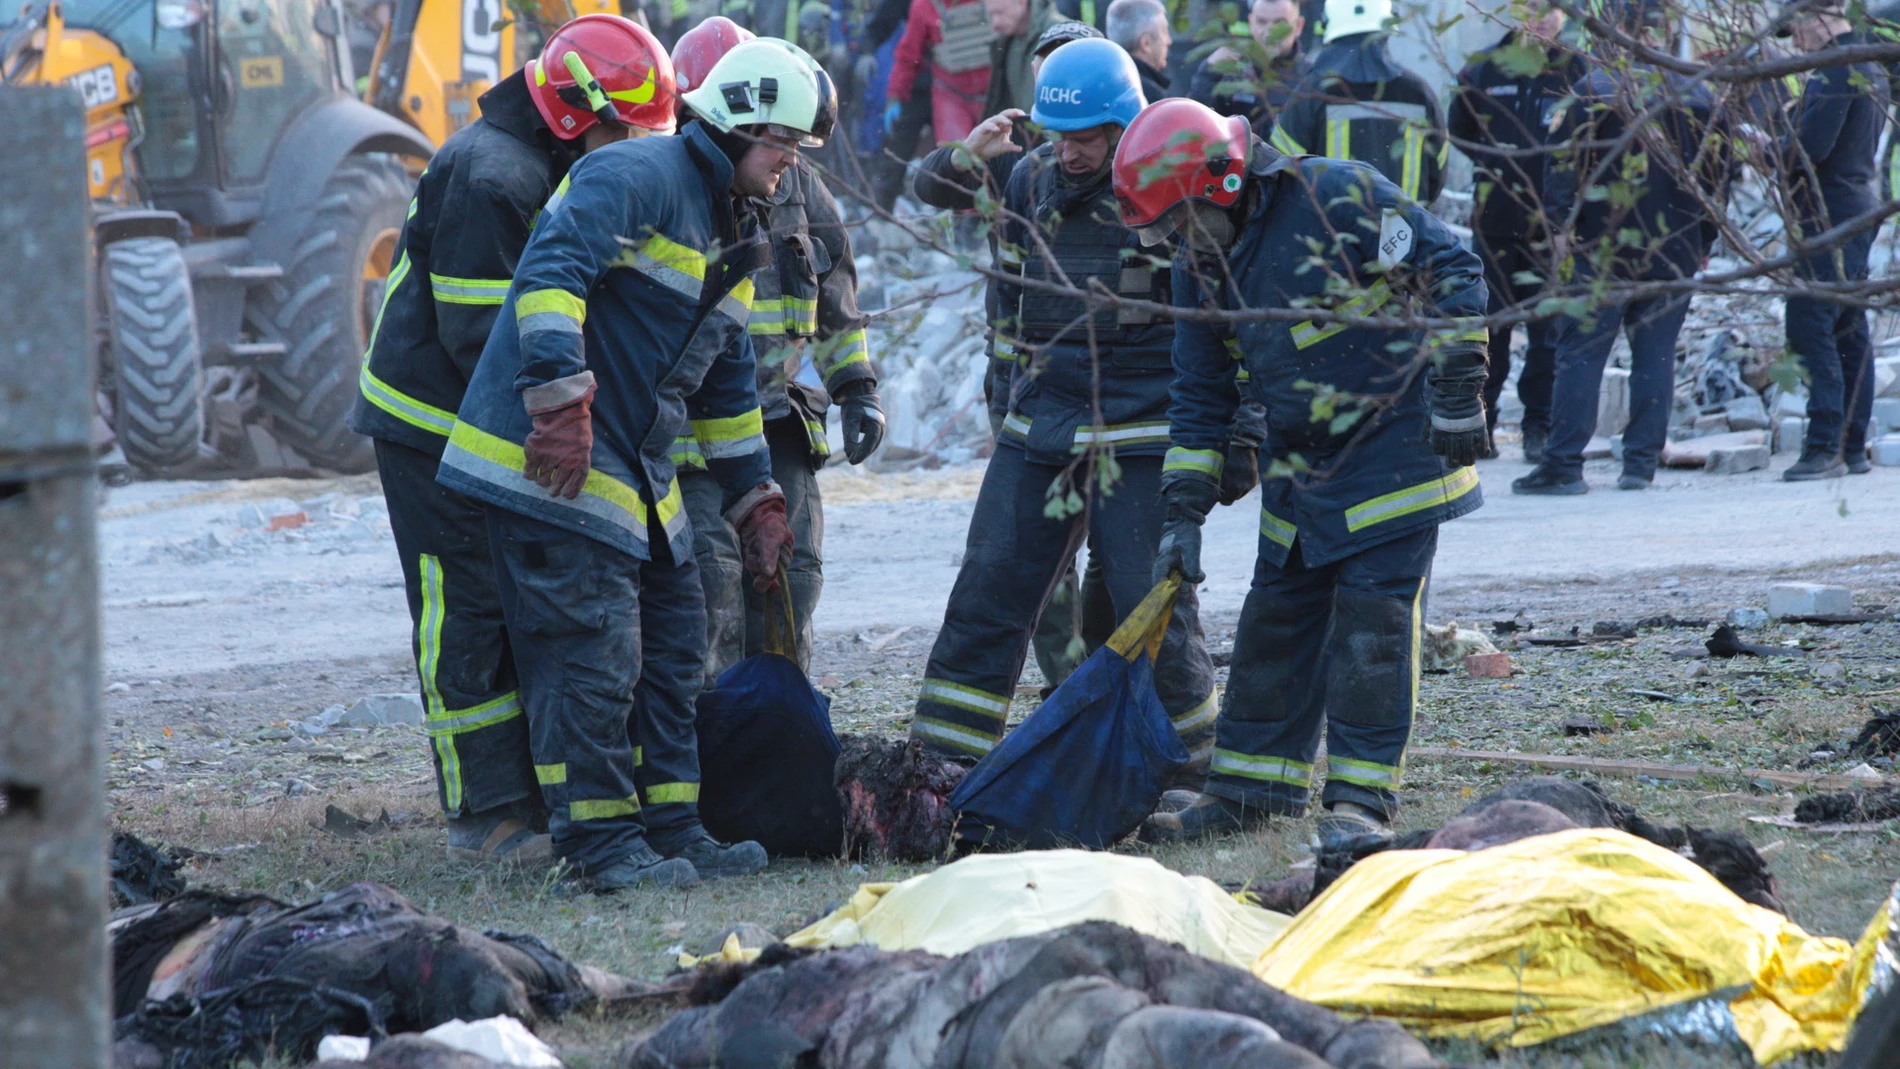 Hroza (Ukraine), 05/10/2023.- Rescuers work near dead bodies at the site of a military strike in the village of Hroza, Kupiansk district, Kharkiv region, northeastern Ukraine, 05 October 2023, amid the Russian invasion. At least 51 people were killed and seven others injured after a Russian missile hit the village of Hroza, Kupiansk district, the head of Kharkiv Regional State Administration Oleh Synehubov wrote on telegram. Among the victim was a six-year-old child, the head of Ukraine's Pre...